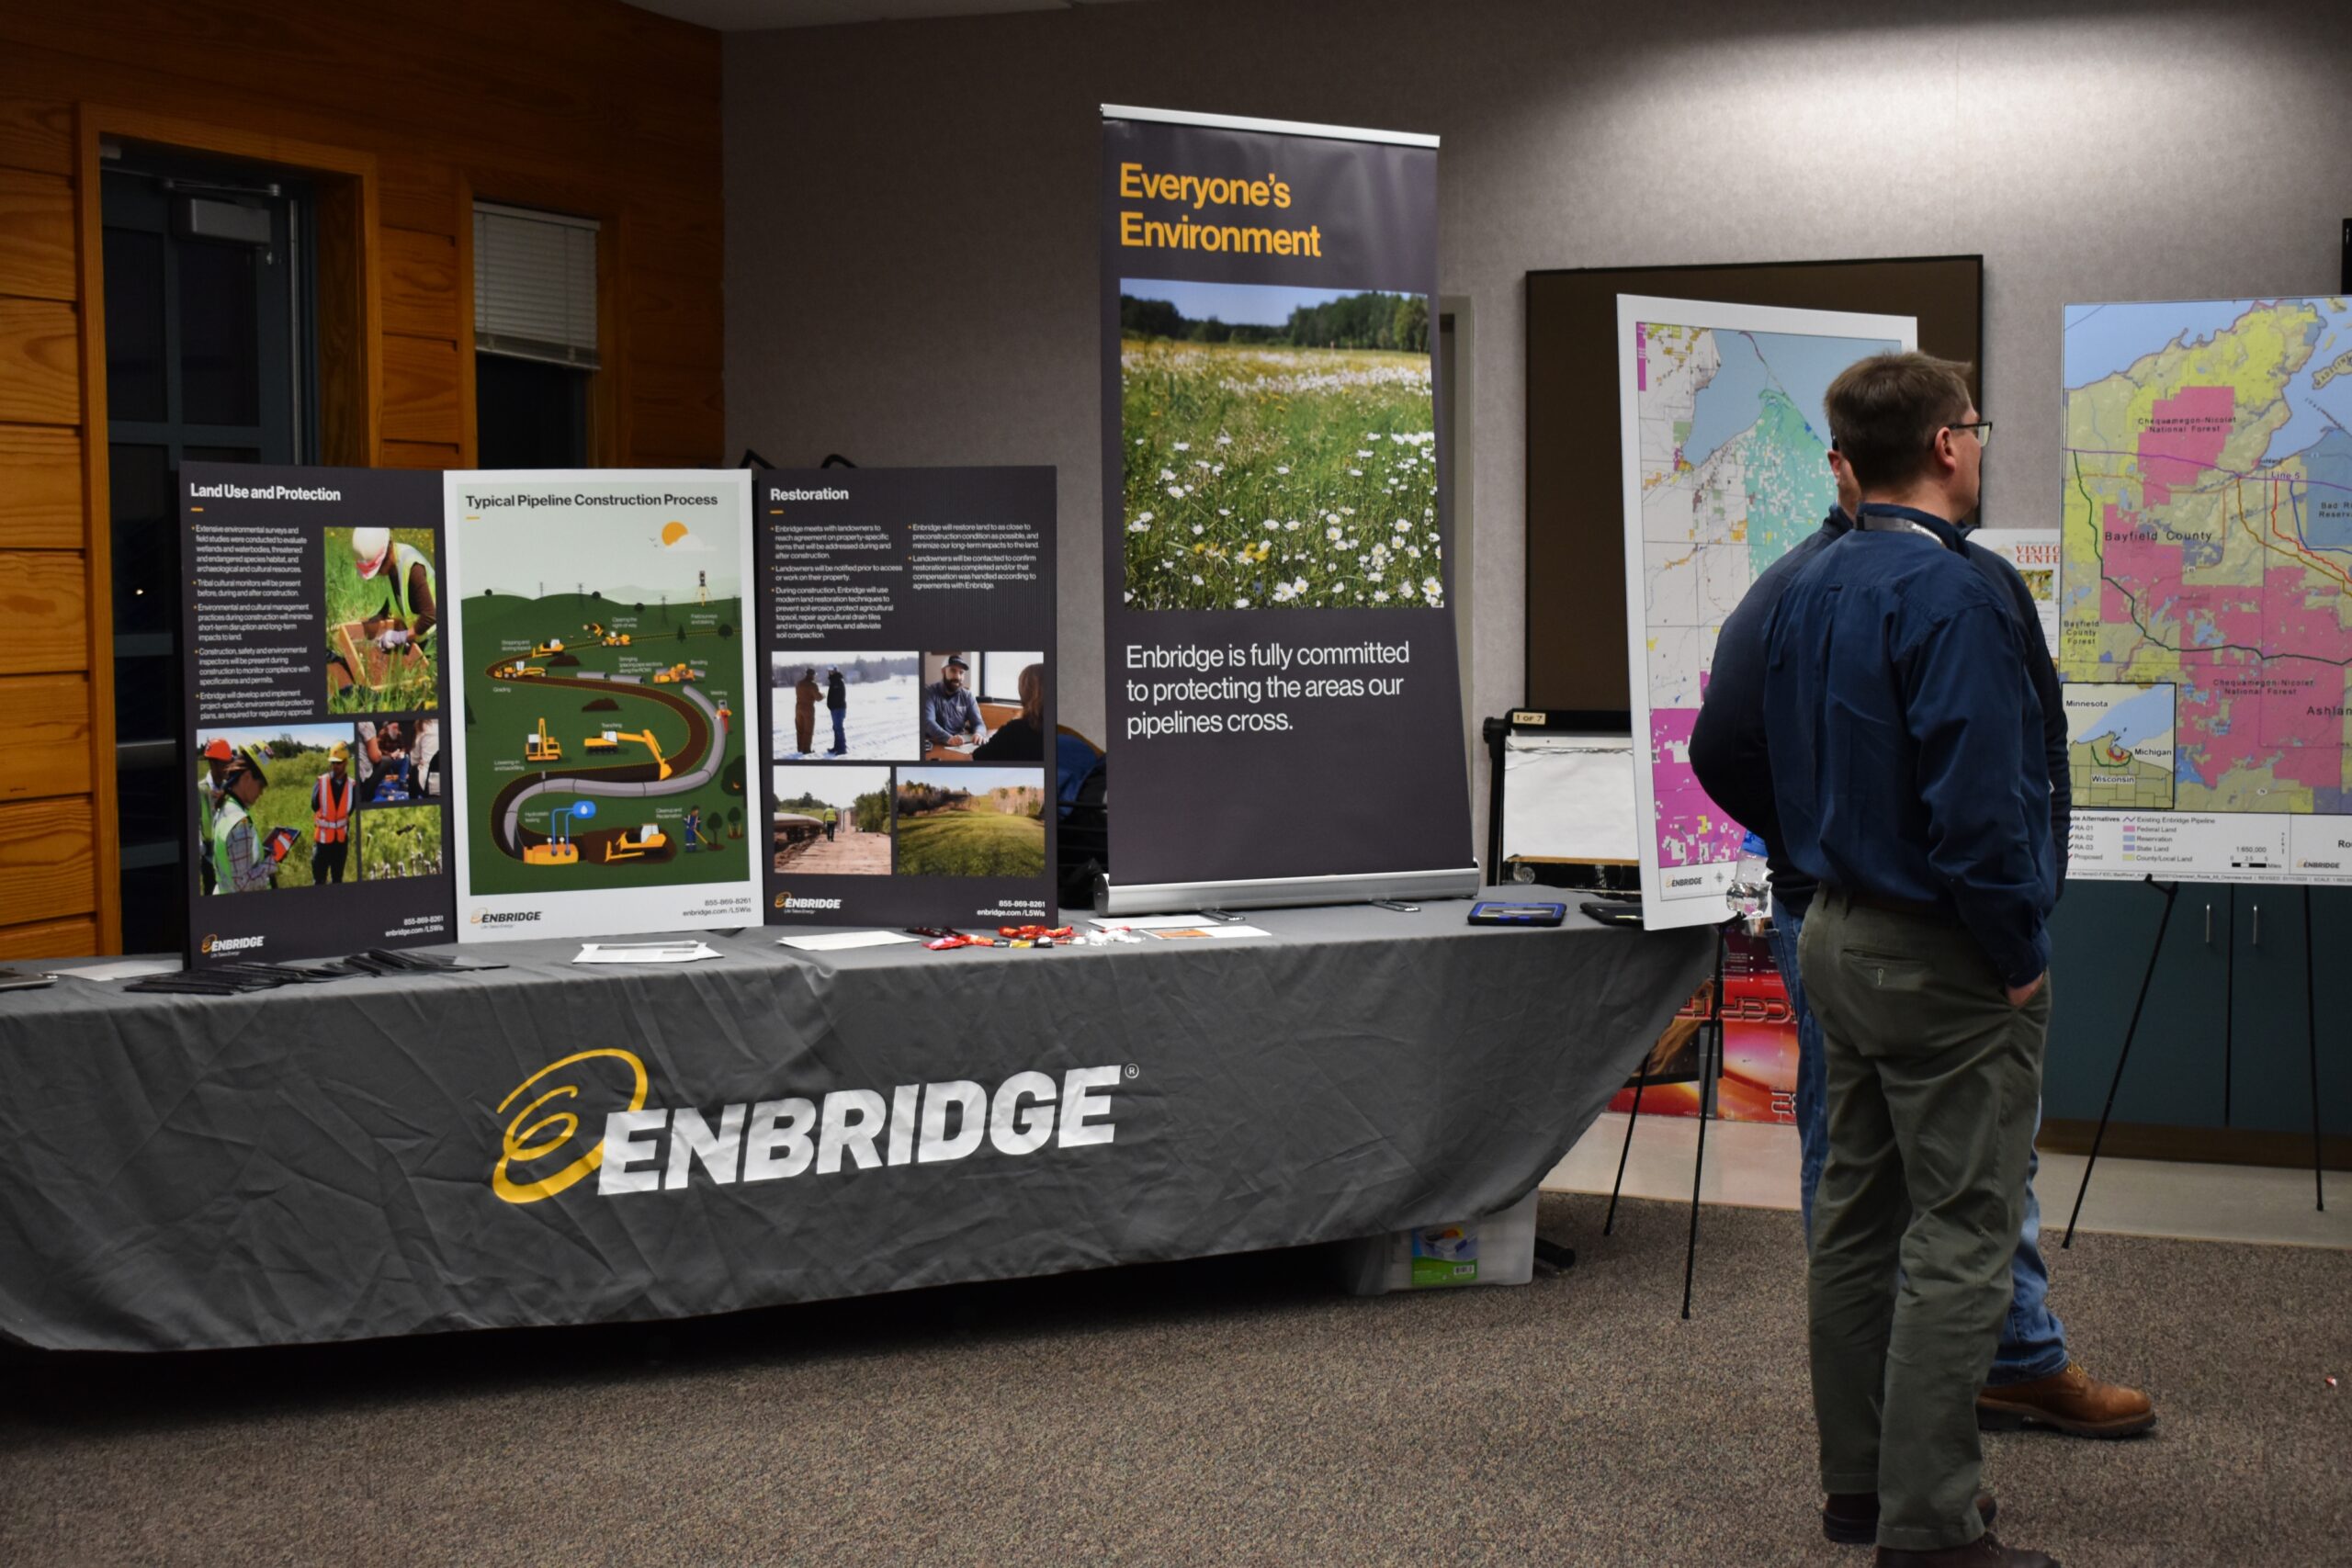 Enbridge Fields Questions In Ashland About Proposed Oil Pipeline Reroute